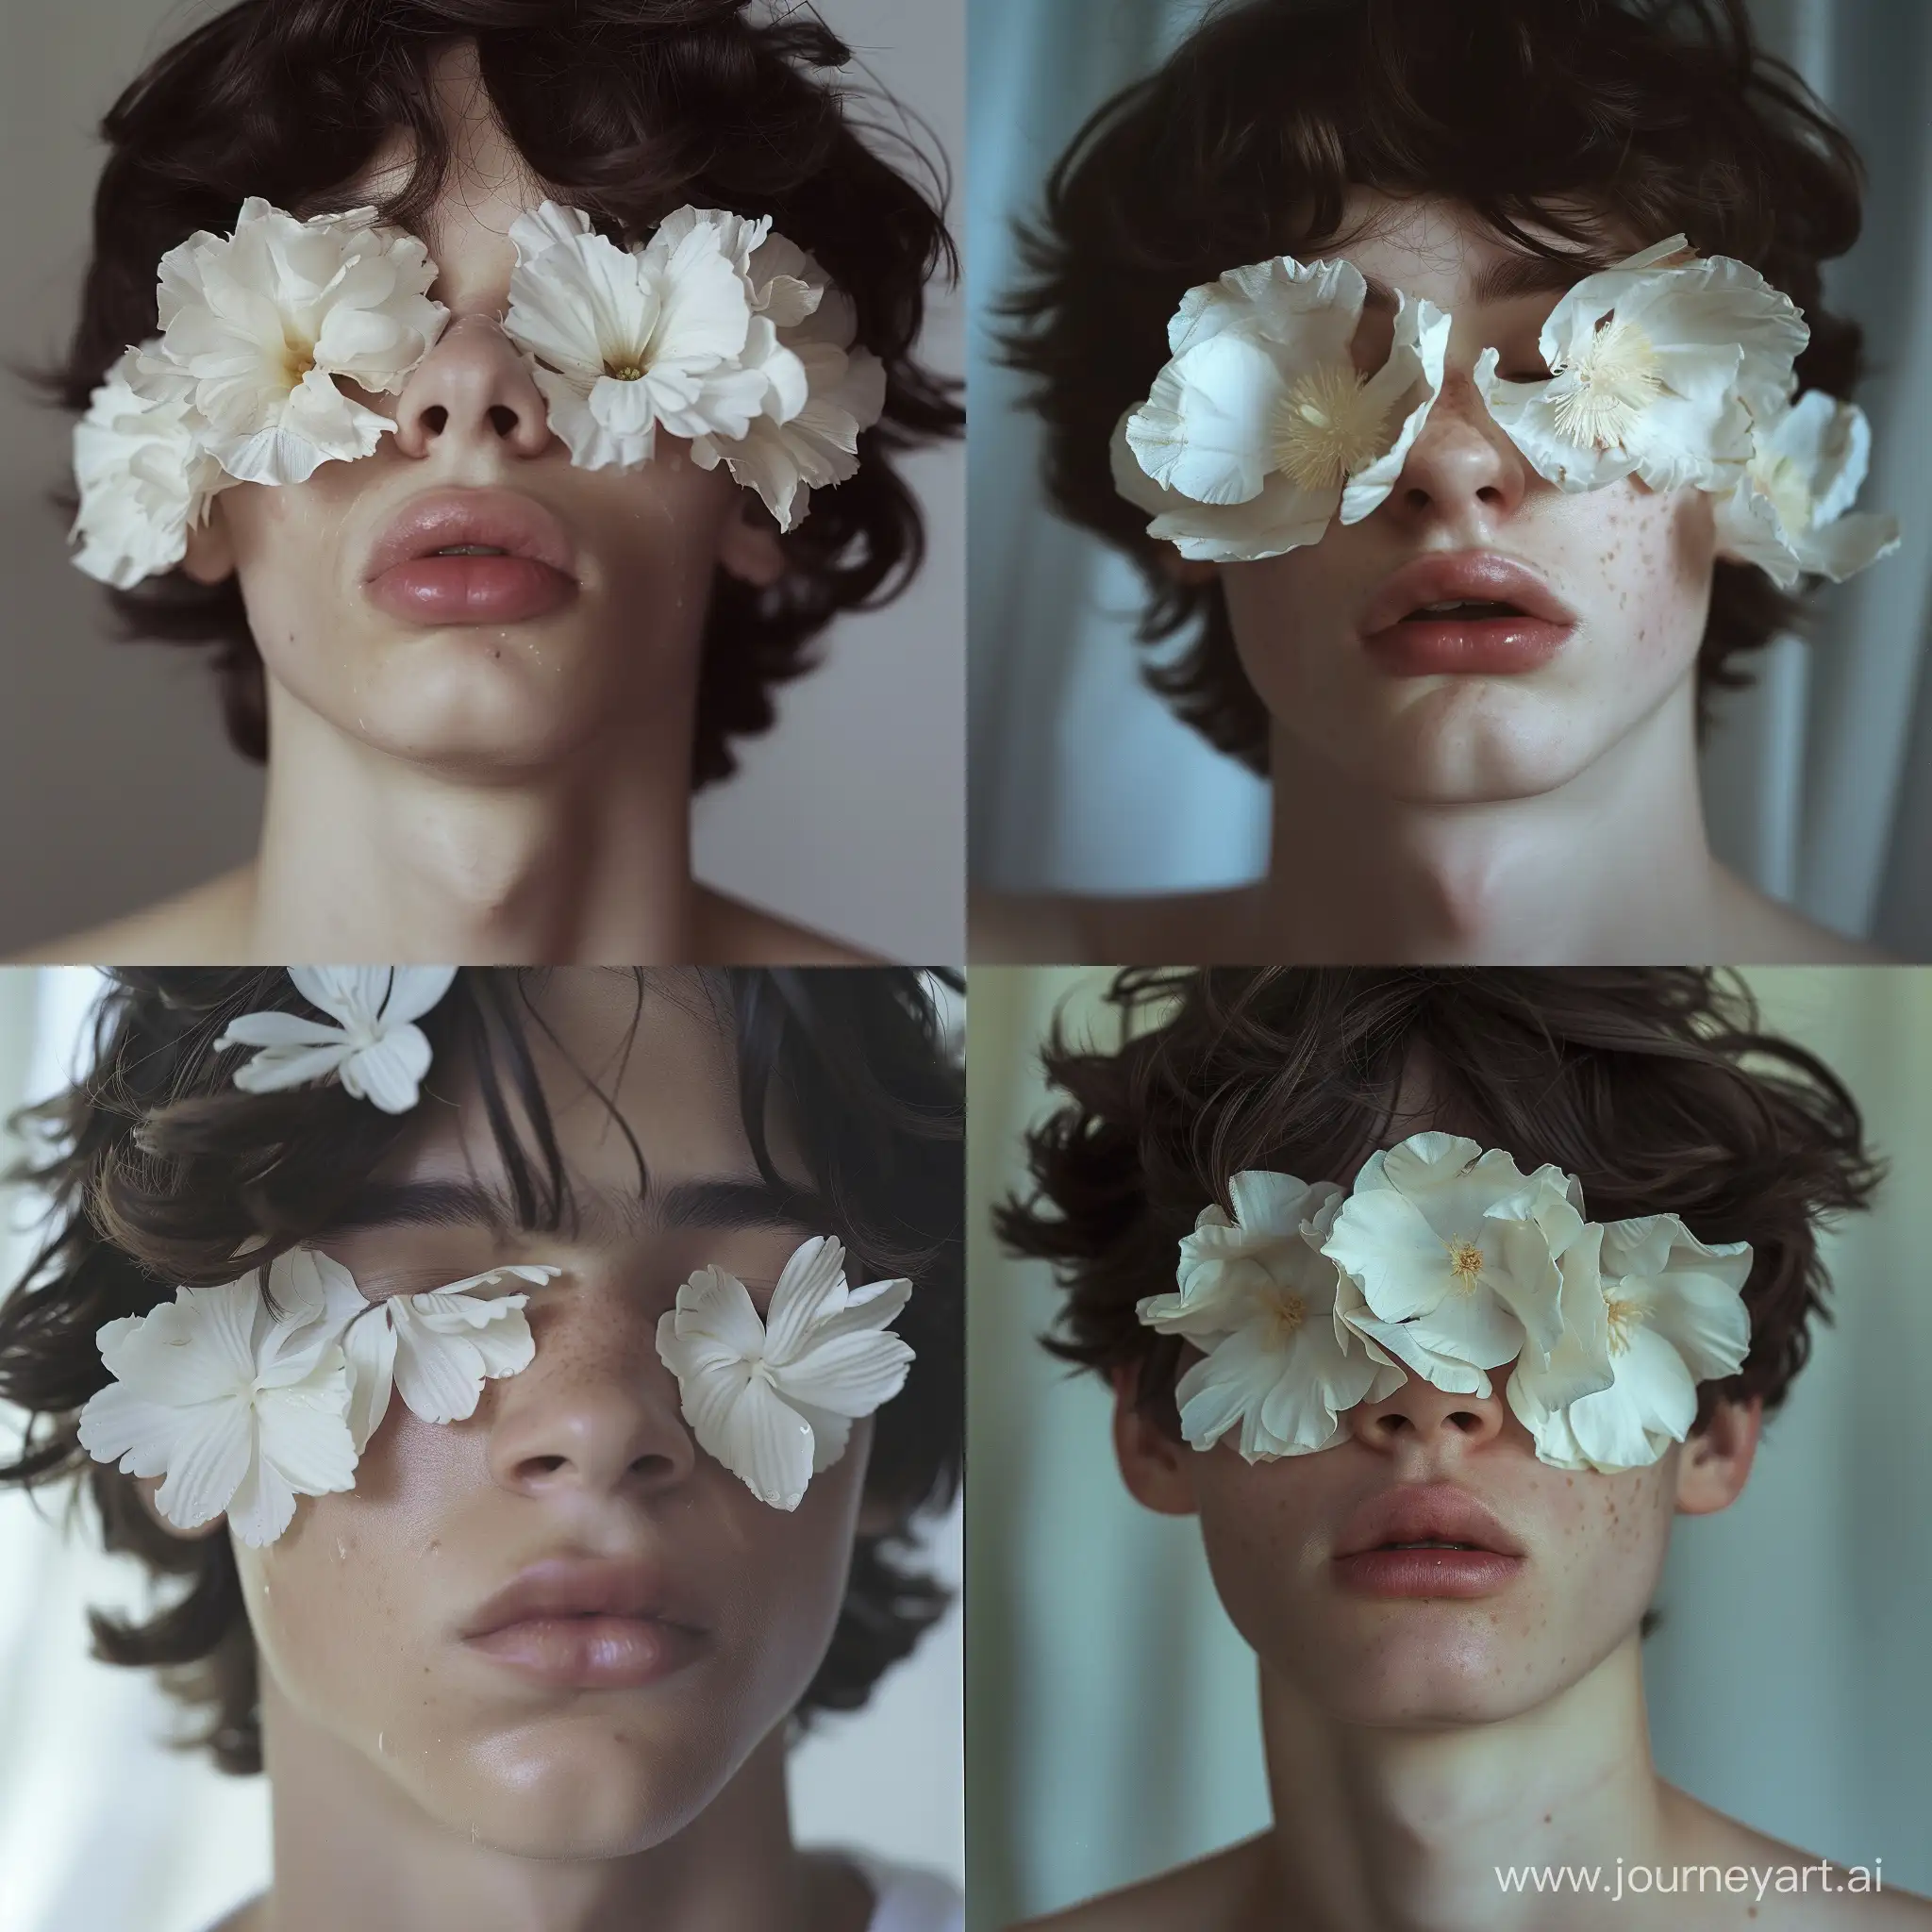 Midium close up shot, young adult with short, dark, wavy hair. No T shirt,his eyes are covered with white flowers. The flowers are large with multiple petals,positioned across the person's closed eyes